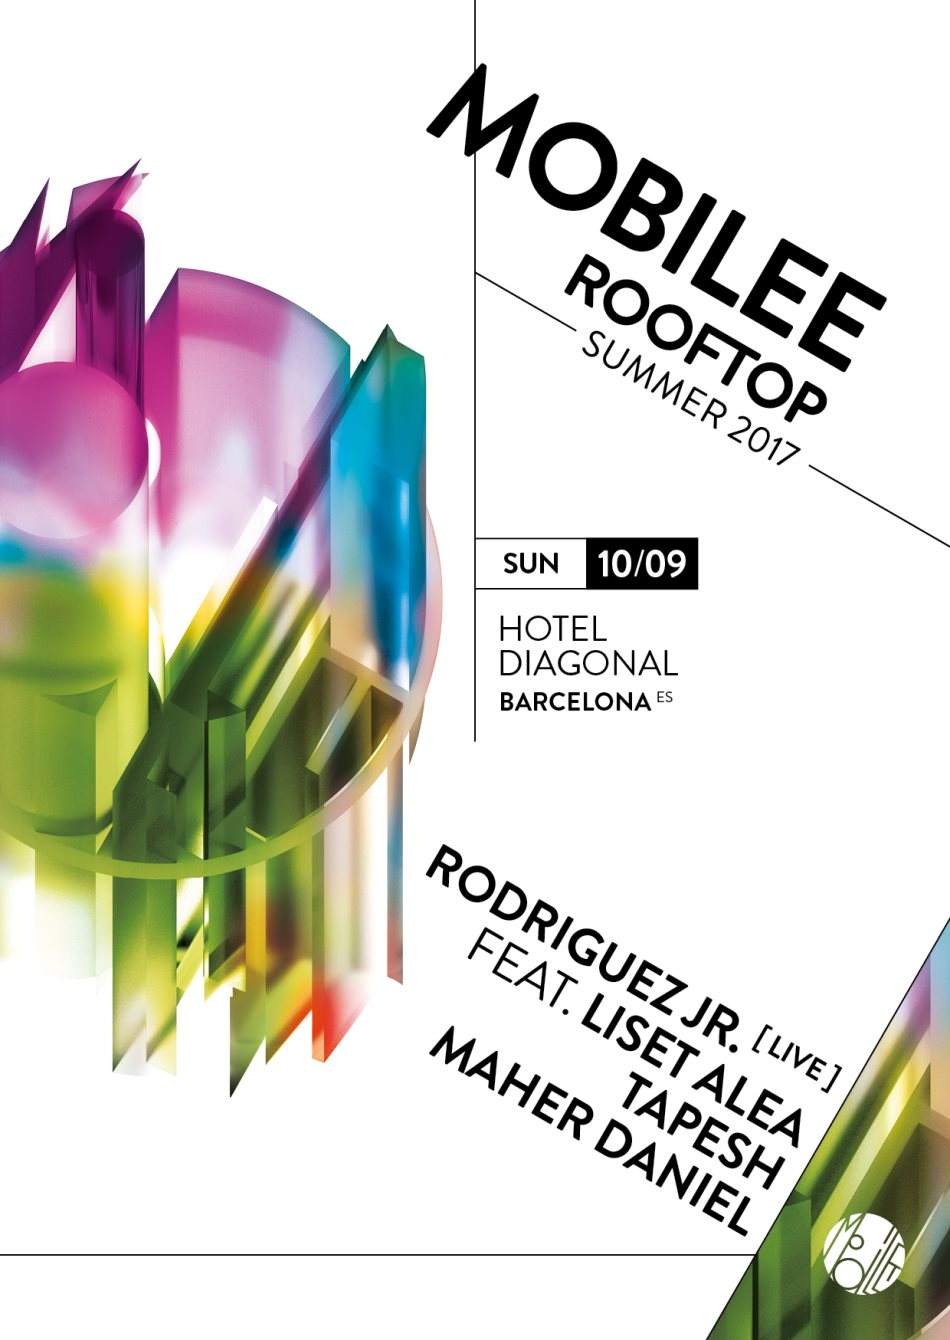 Mobilee Rooftop with Rodriguez Jr. Feat. Liset Alea, Tapesh, Maher Daniel - フライヤー表